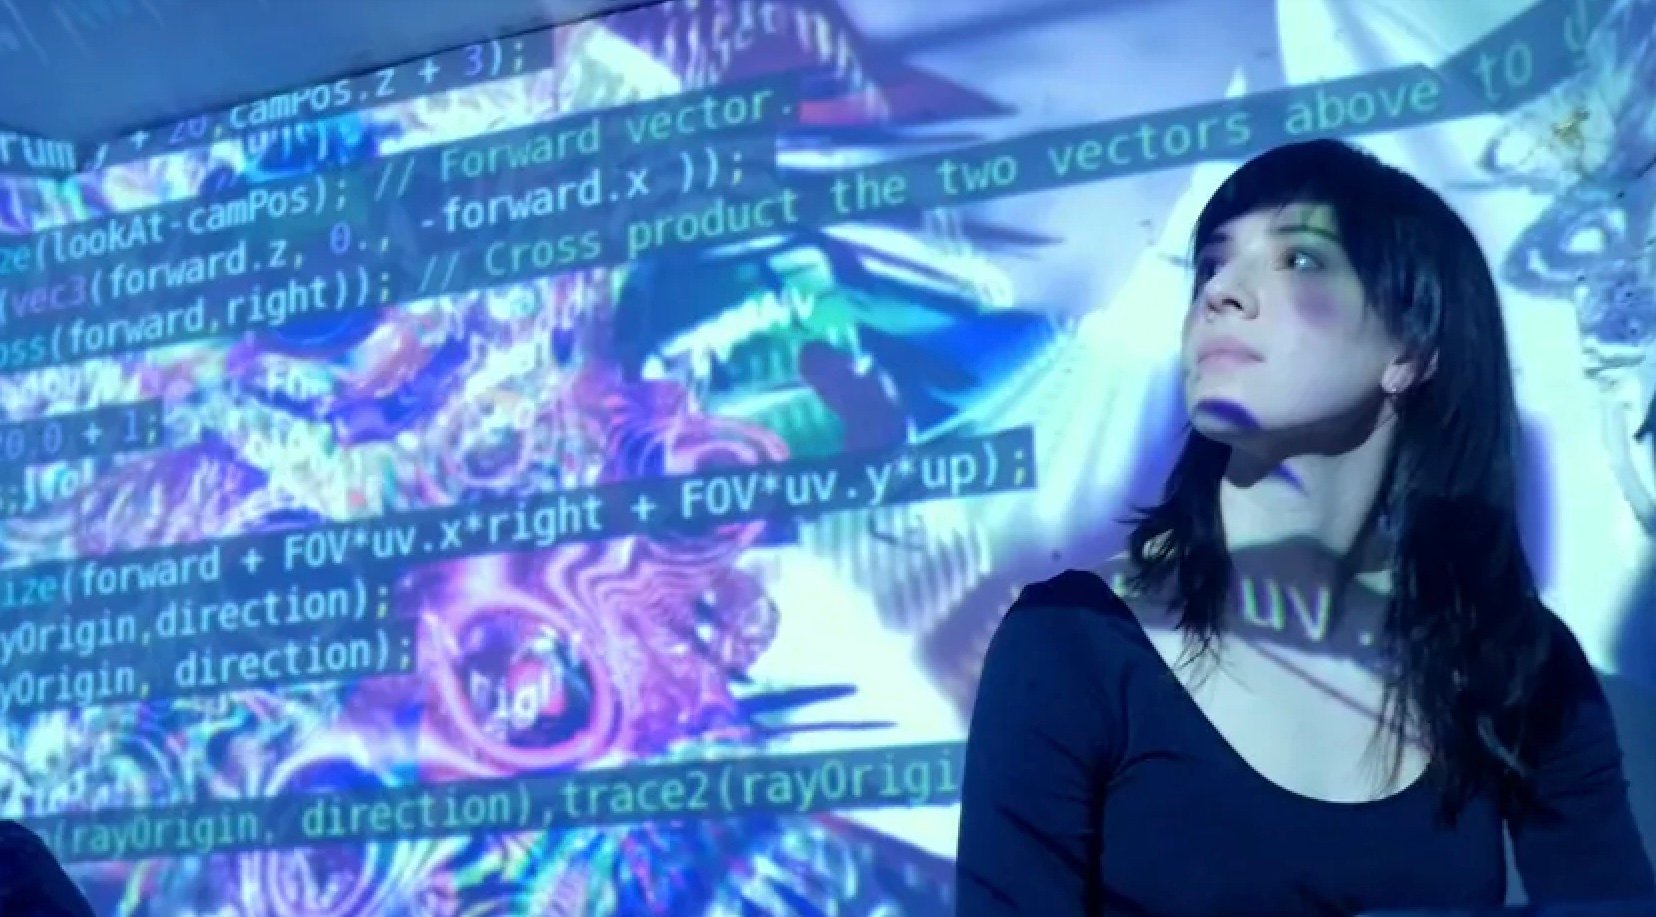 A woman in long dark hair stands against a wall against which computer codes and abstract purple and blue images are projected